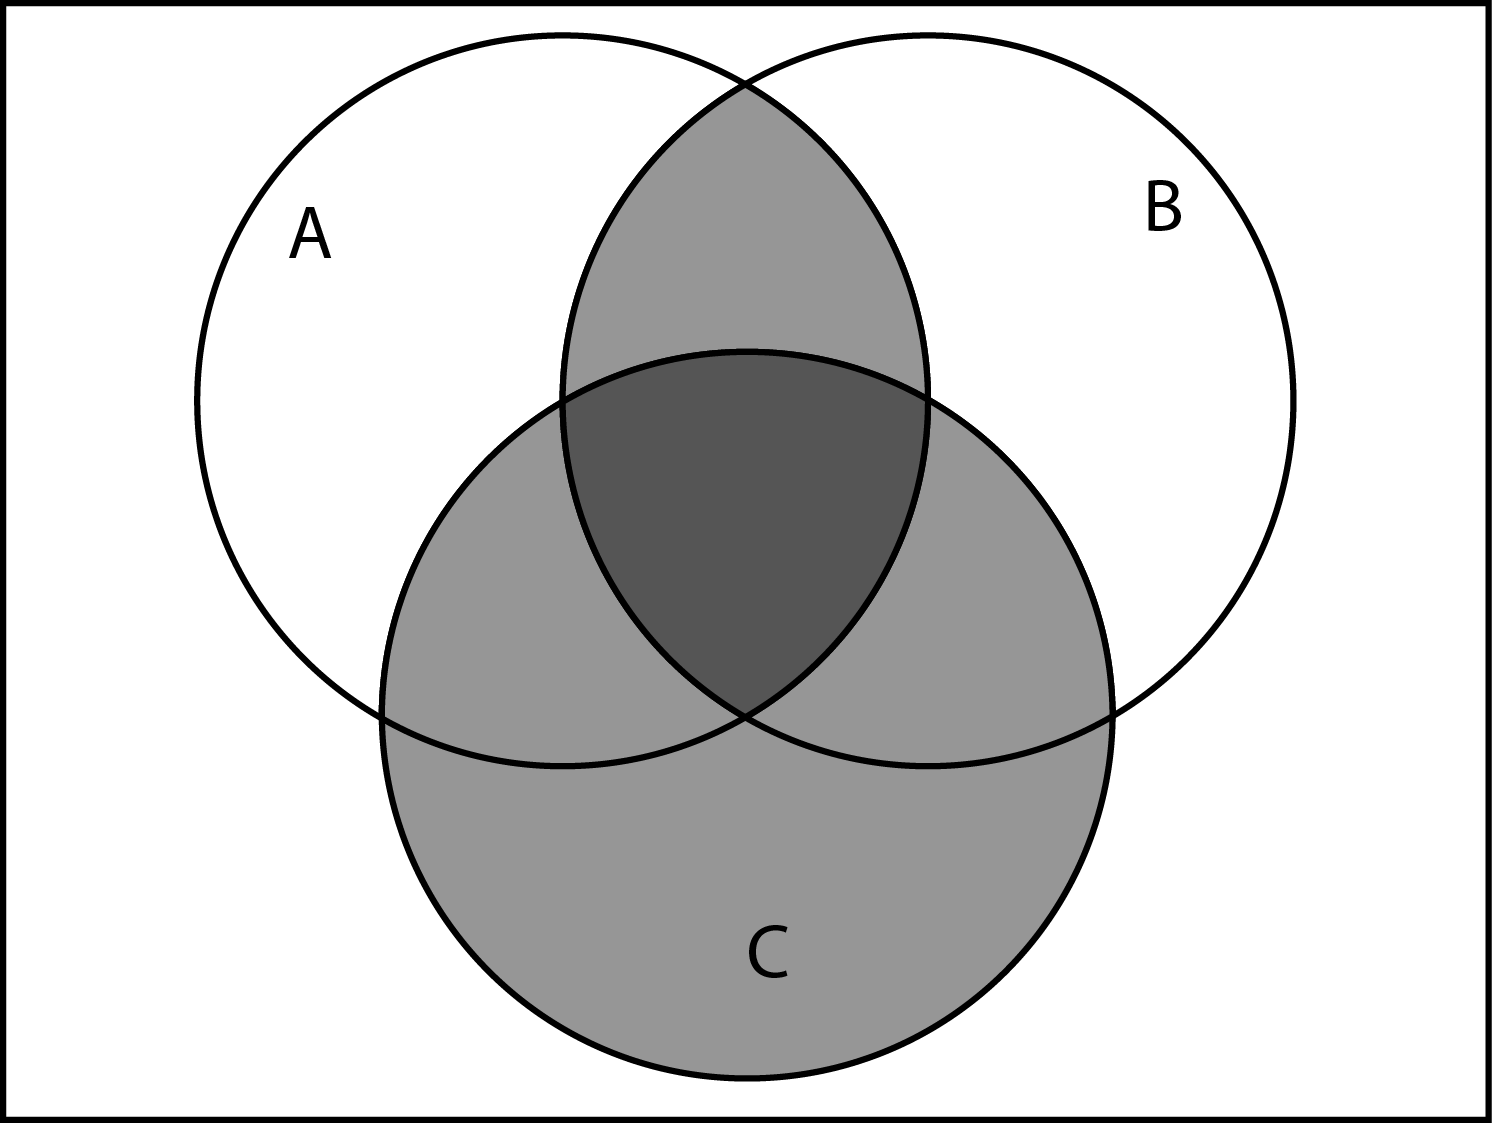 31 Union And Intersection Venn Diagram - Wiring Diagram ...